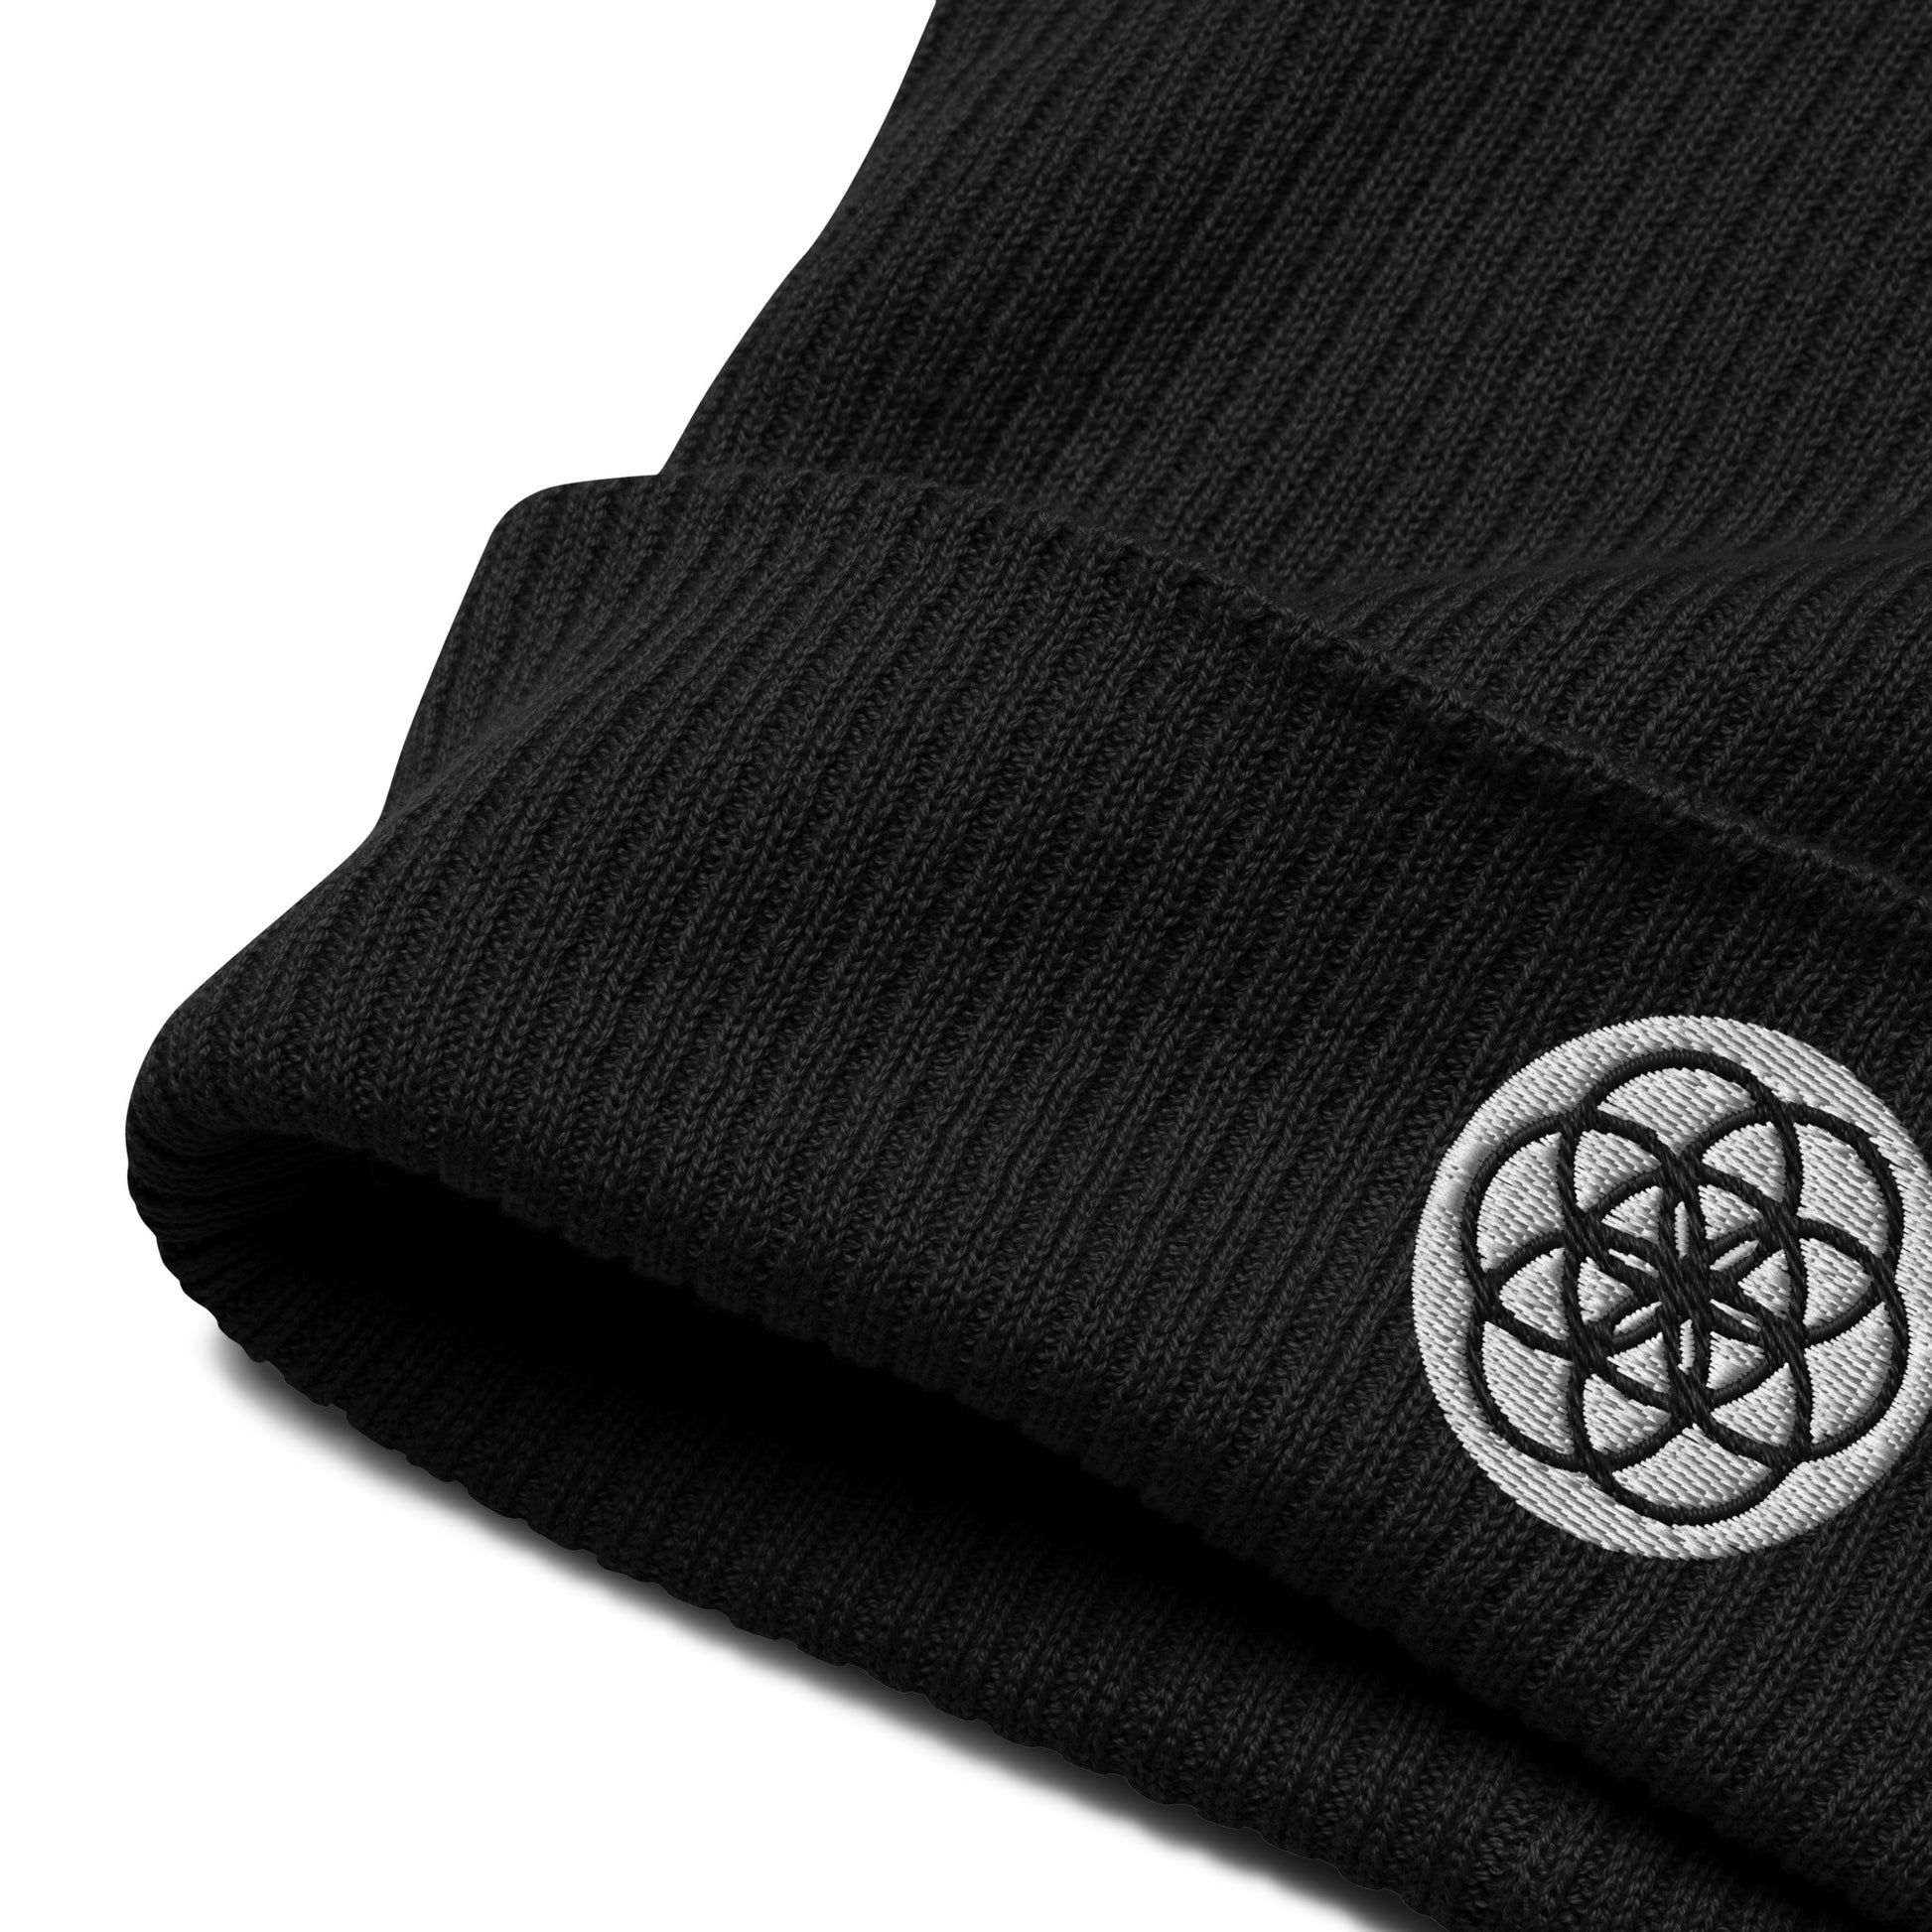 The Seed of Life beanie in Midnight Black is made from 100% organic cotton and it’s the perfect cozy addition to your energetically elevated wardrobe. The seed of life is an ancient and meaningful sacred geometry symbol that Whether you're stargazing or navigating the urban jungle, let this beanie remind you of your place in the cosmic tapestry. 